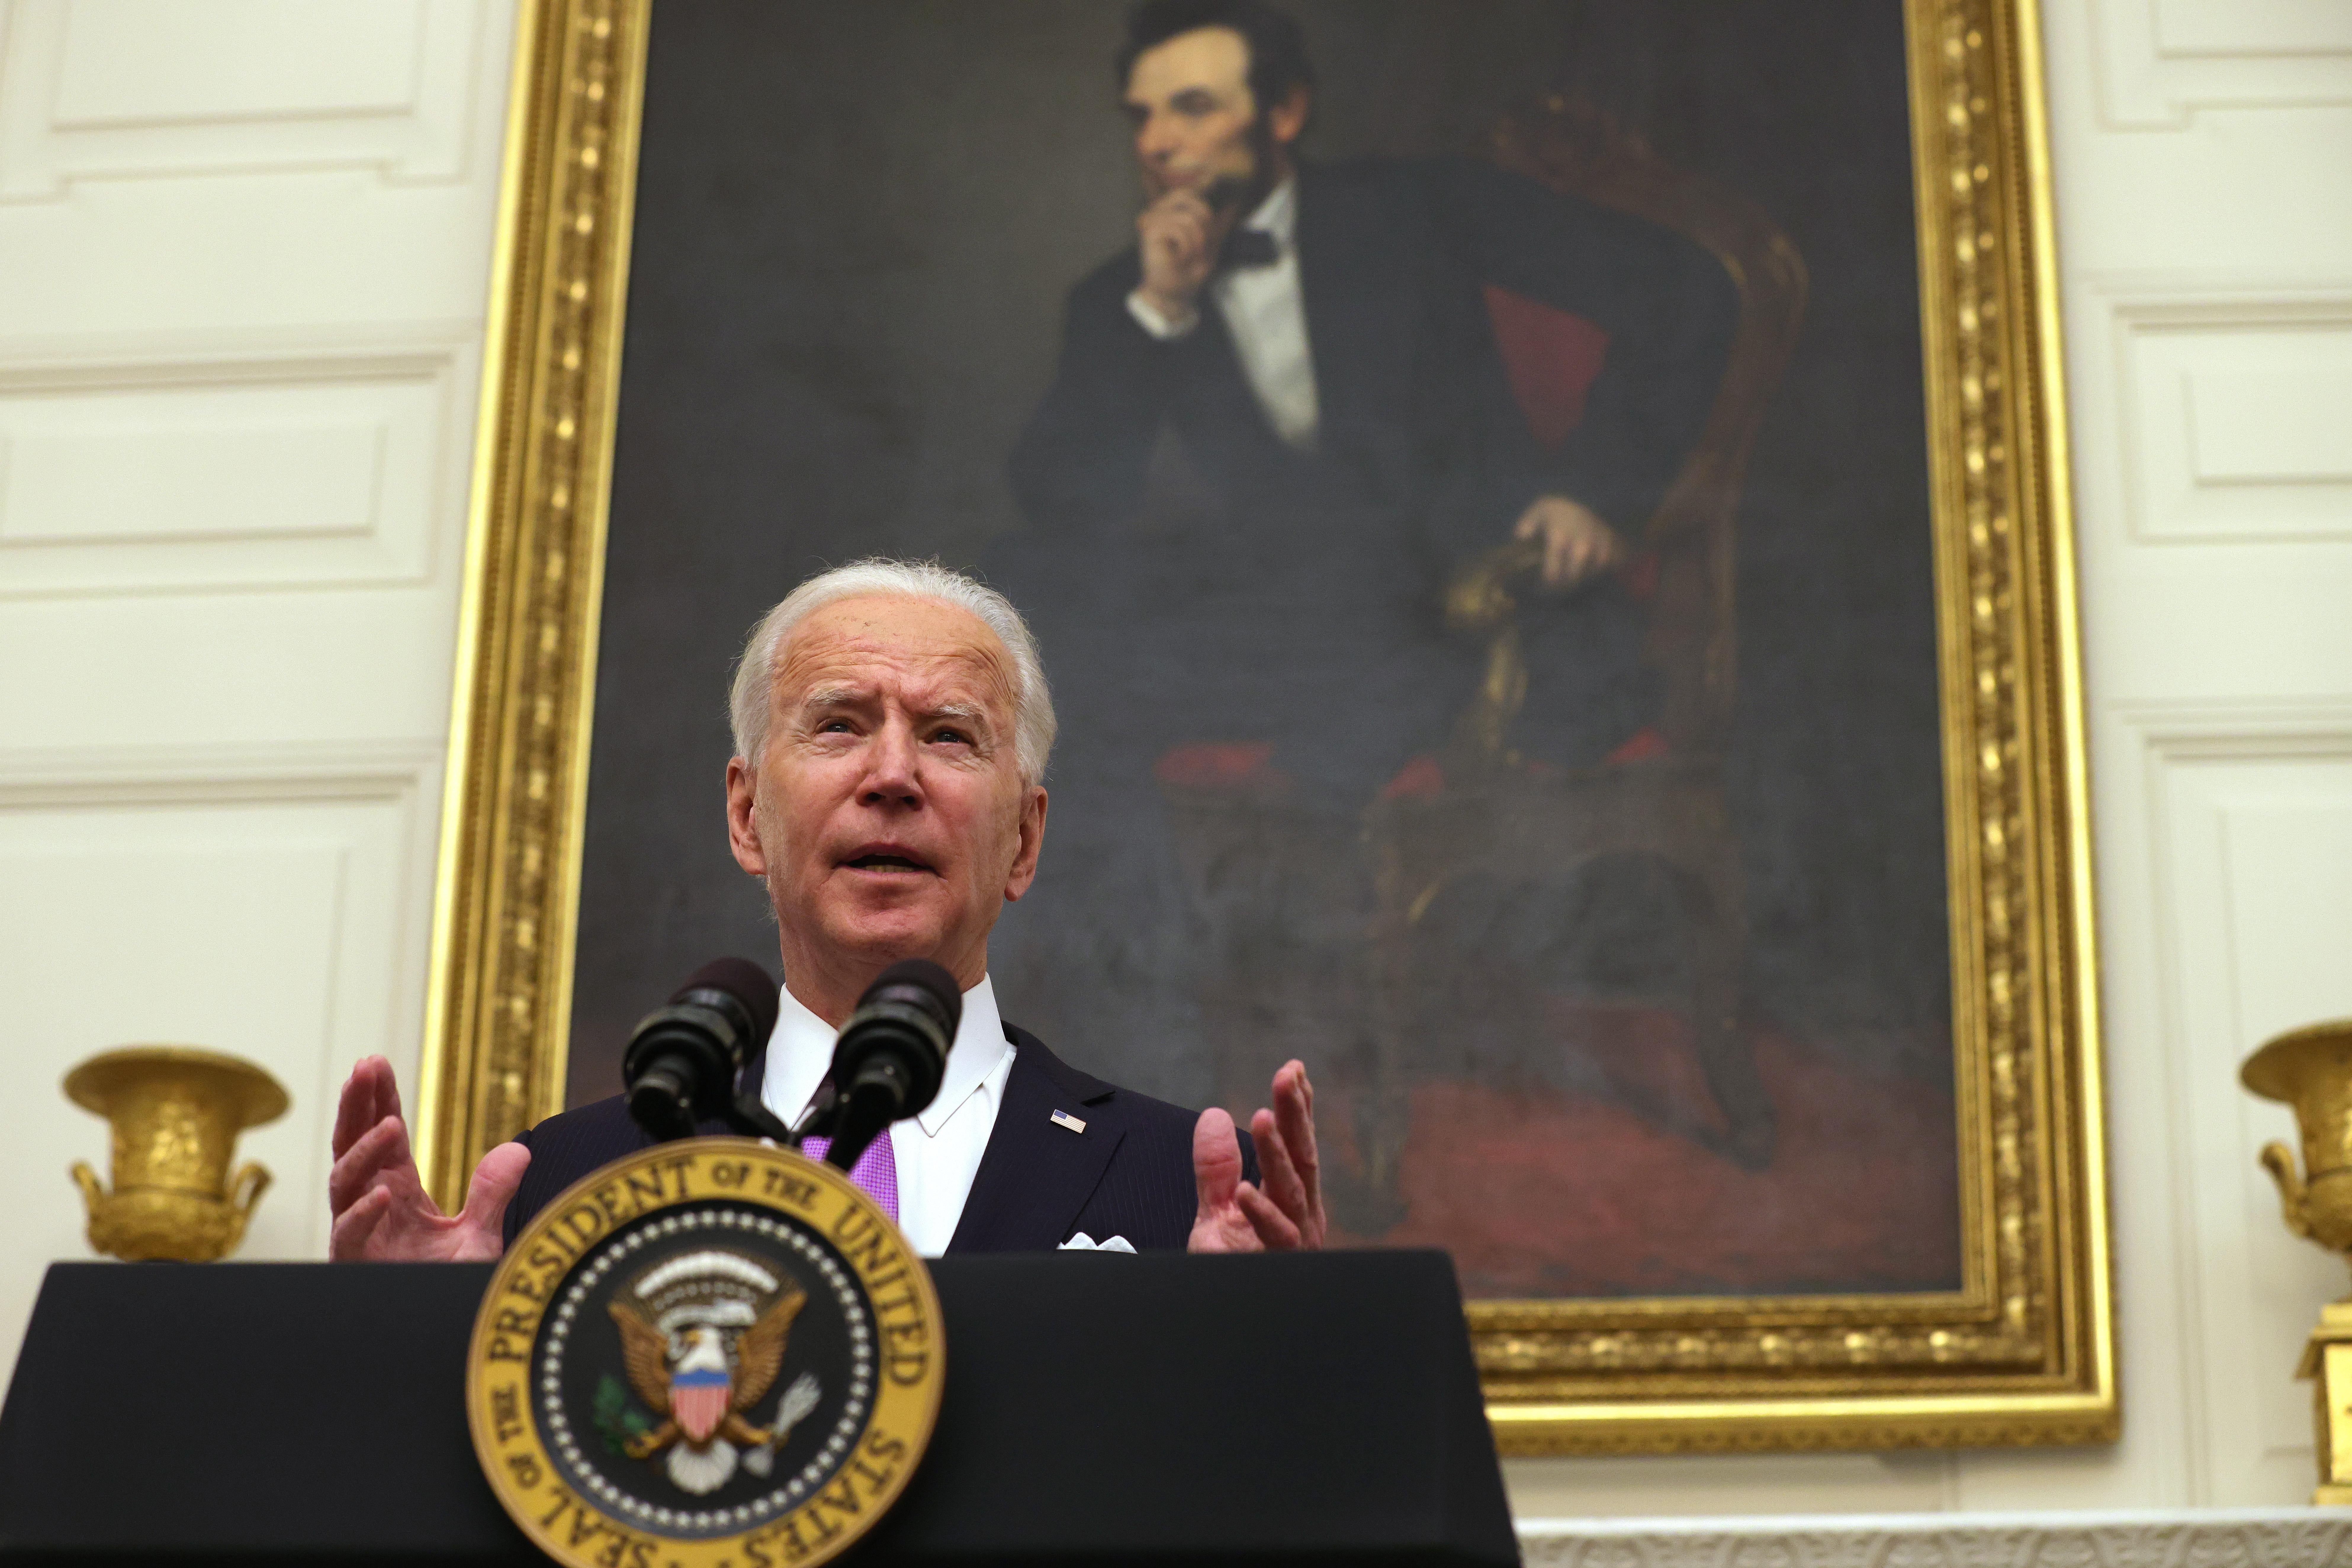 Biden speaks at a podium, standing in front of a portrait of Abraham Lincoln hanging in the State Dining Room